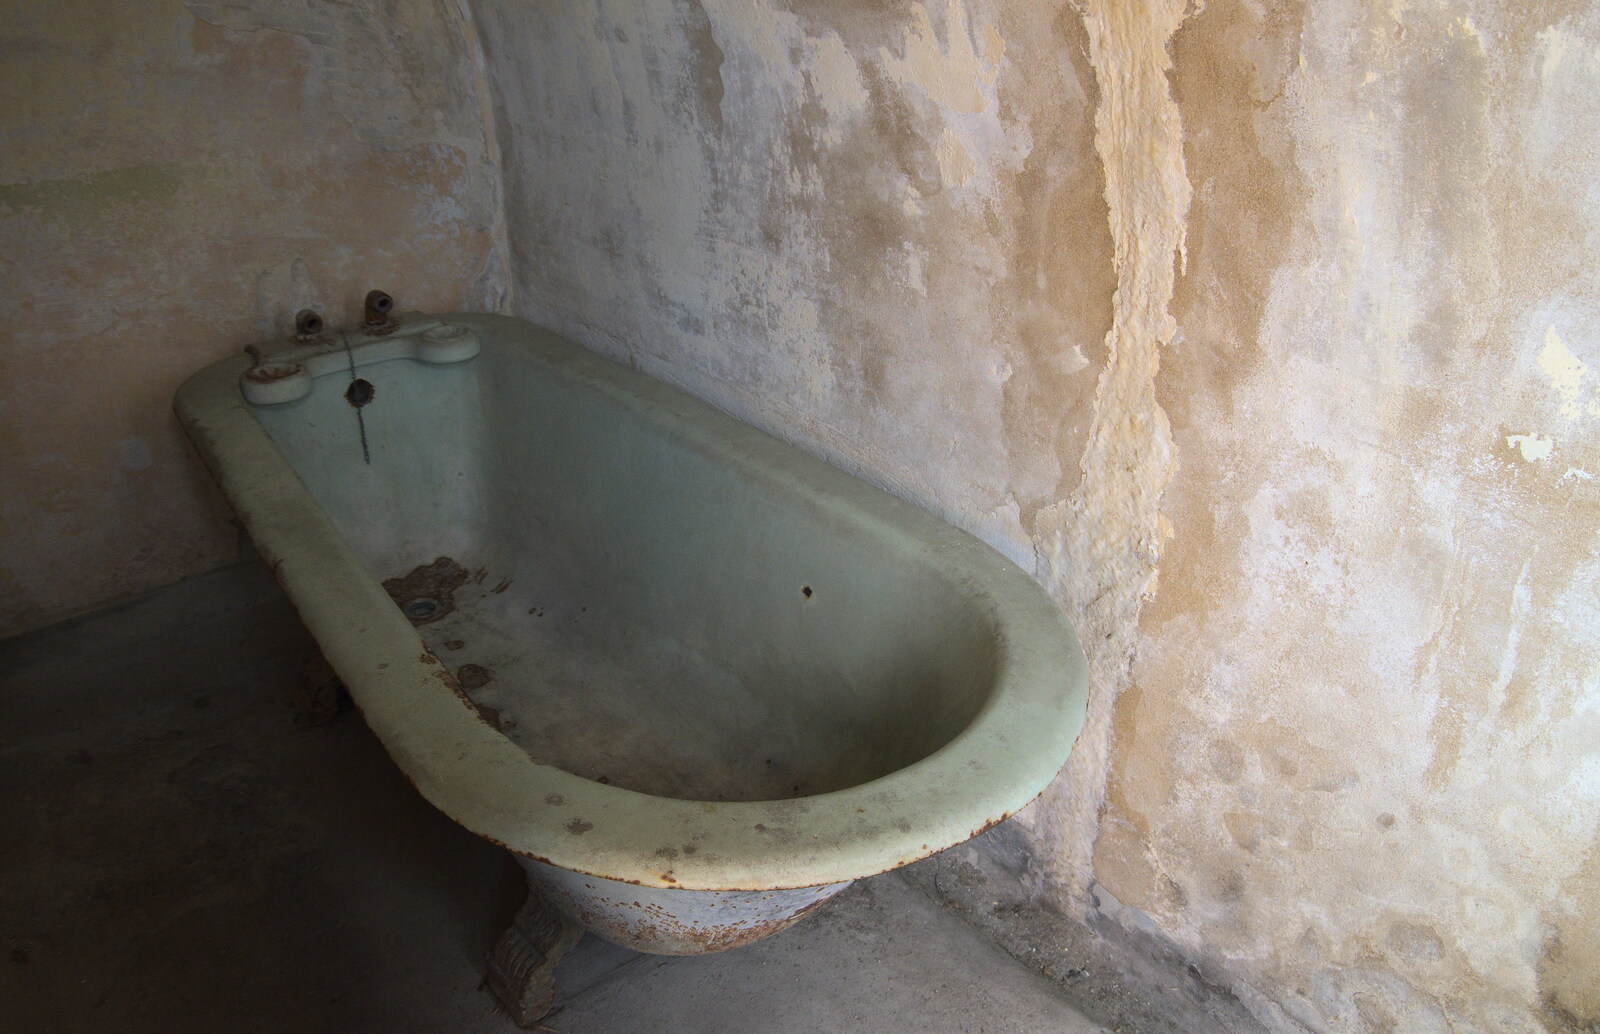 The luxury of a cast-iron bath from A Trip to Landguard Fort, Felixstowe, Suffolk - 16th October 2022